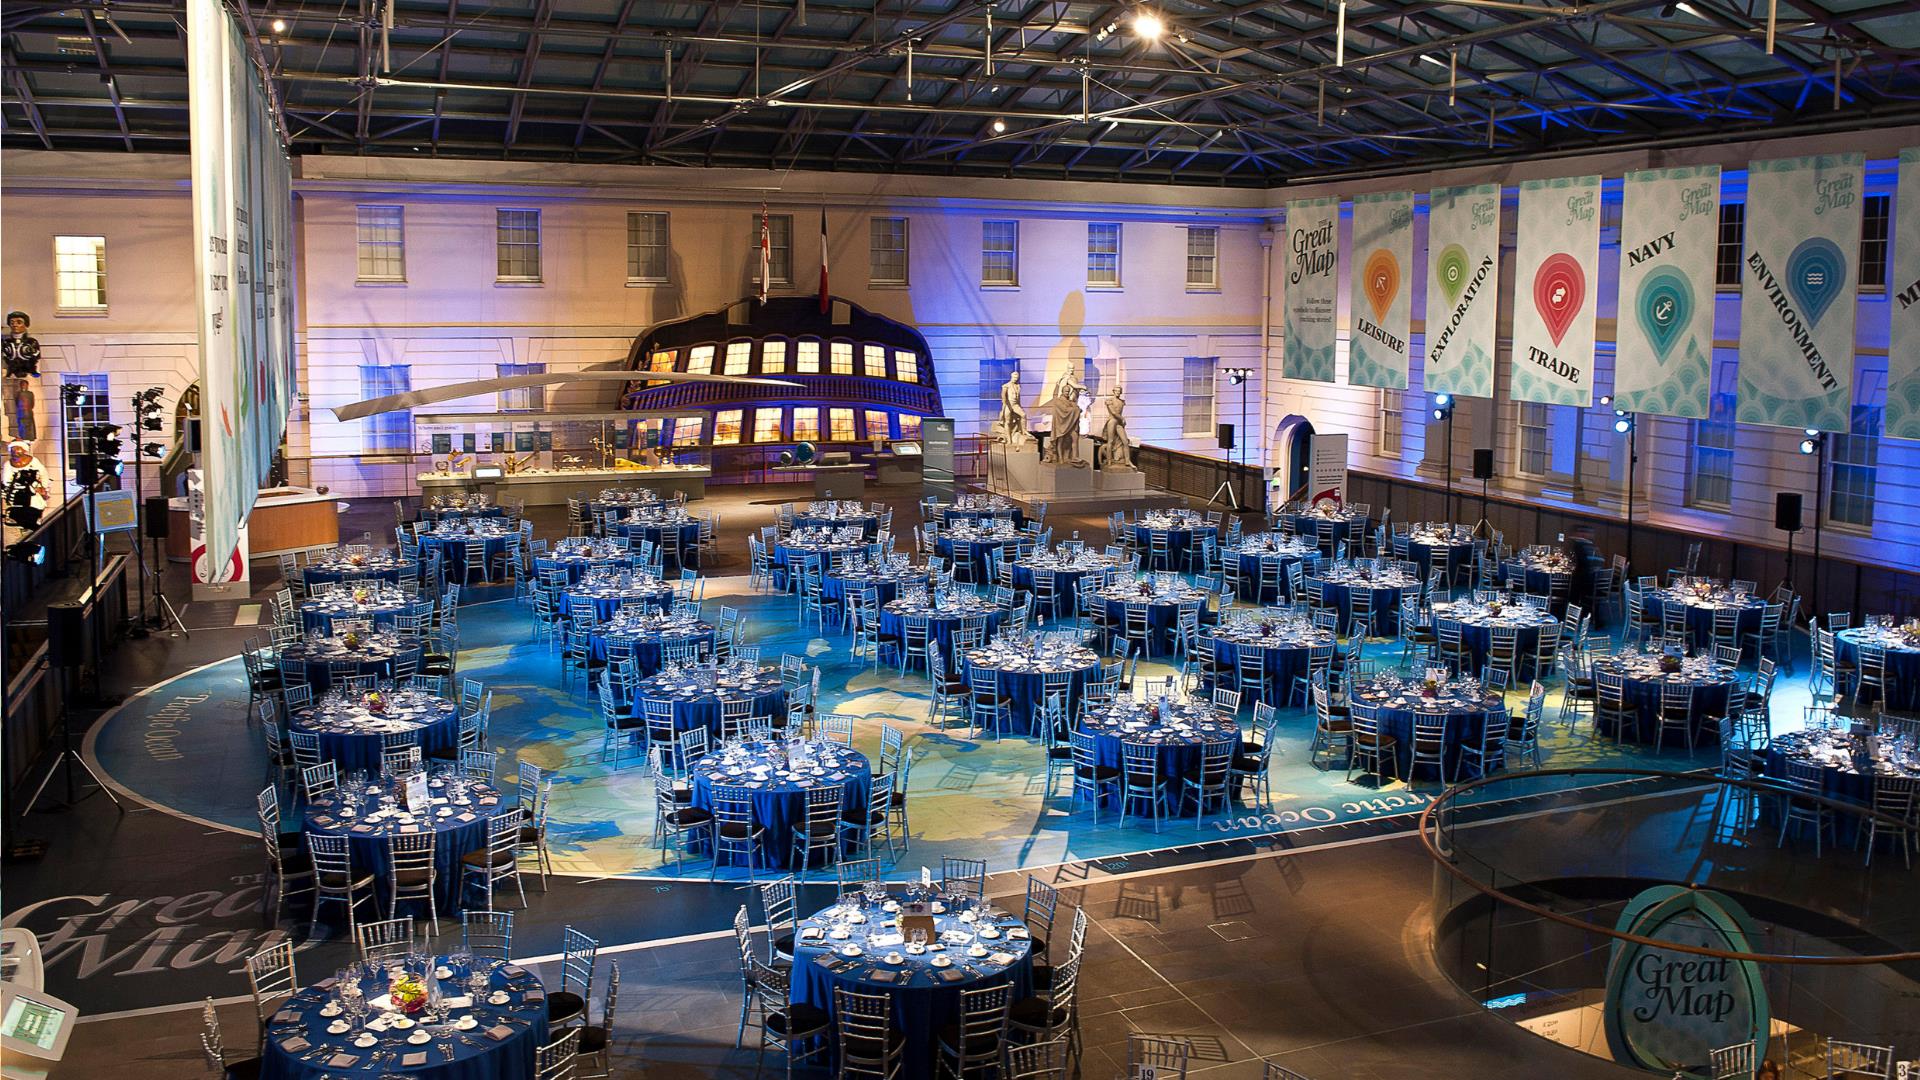 Gala dining style tables are laid out for an event at the National Maritime Museum in Greenwich.